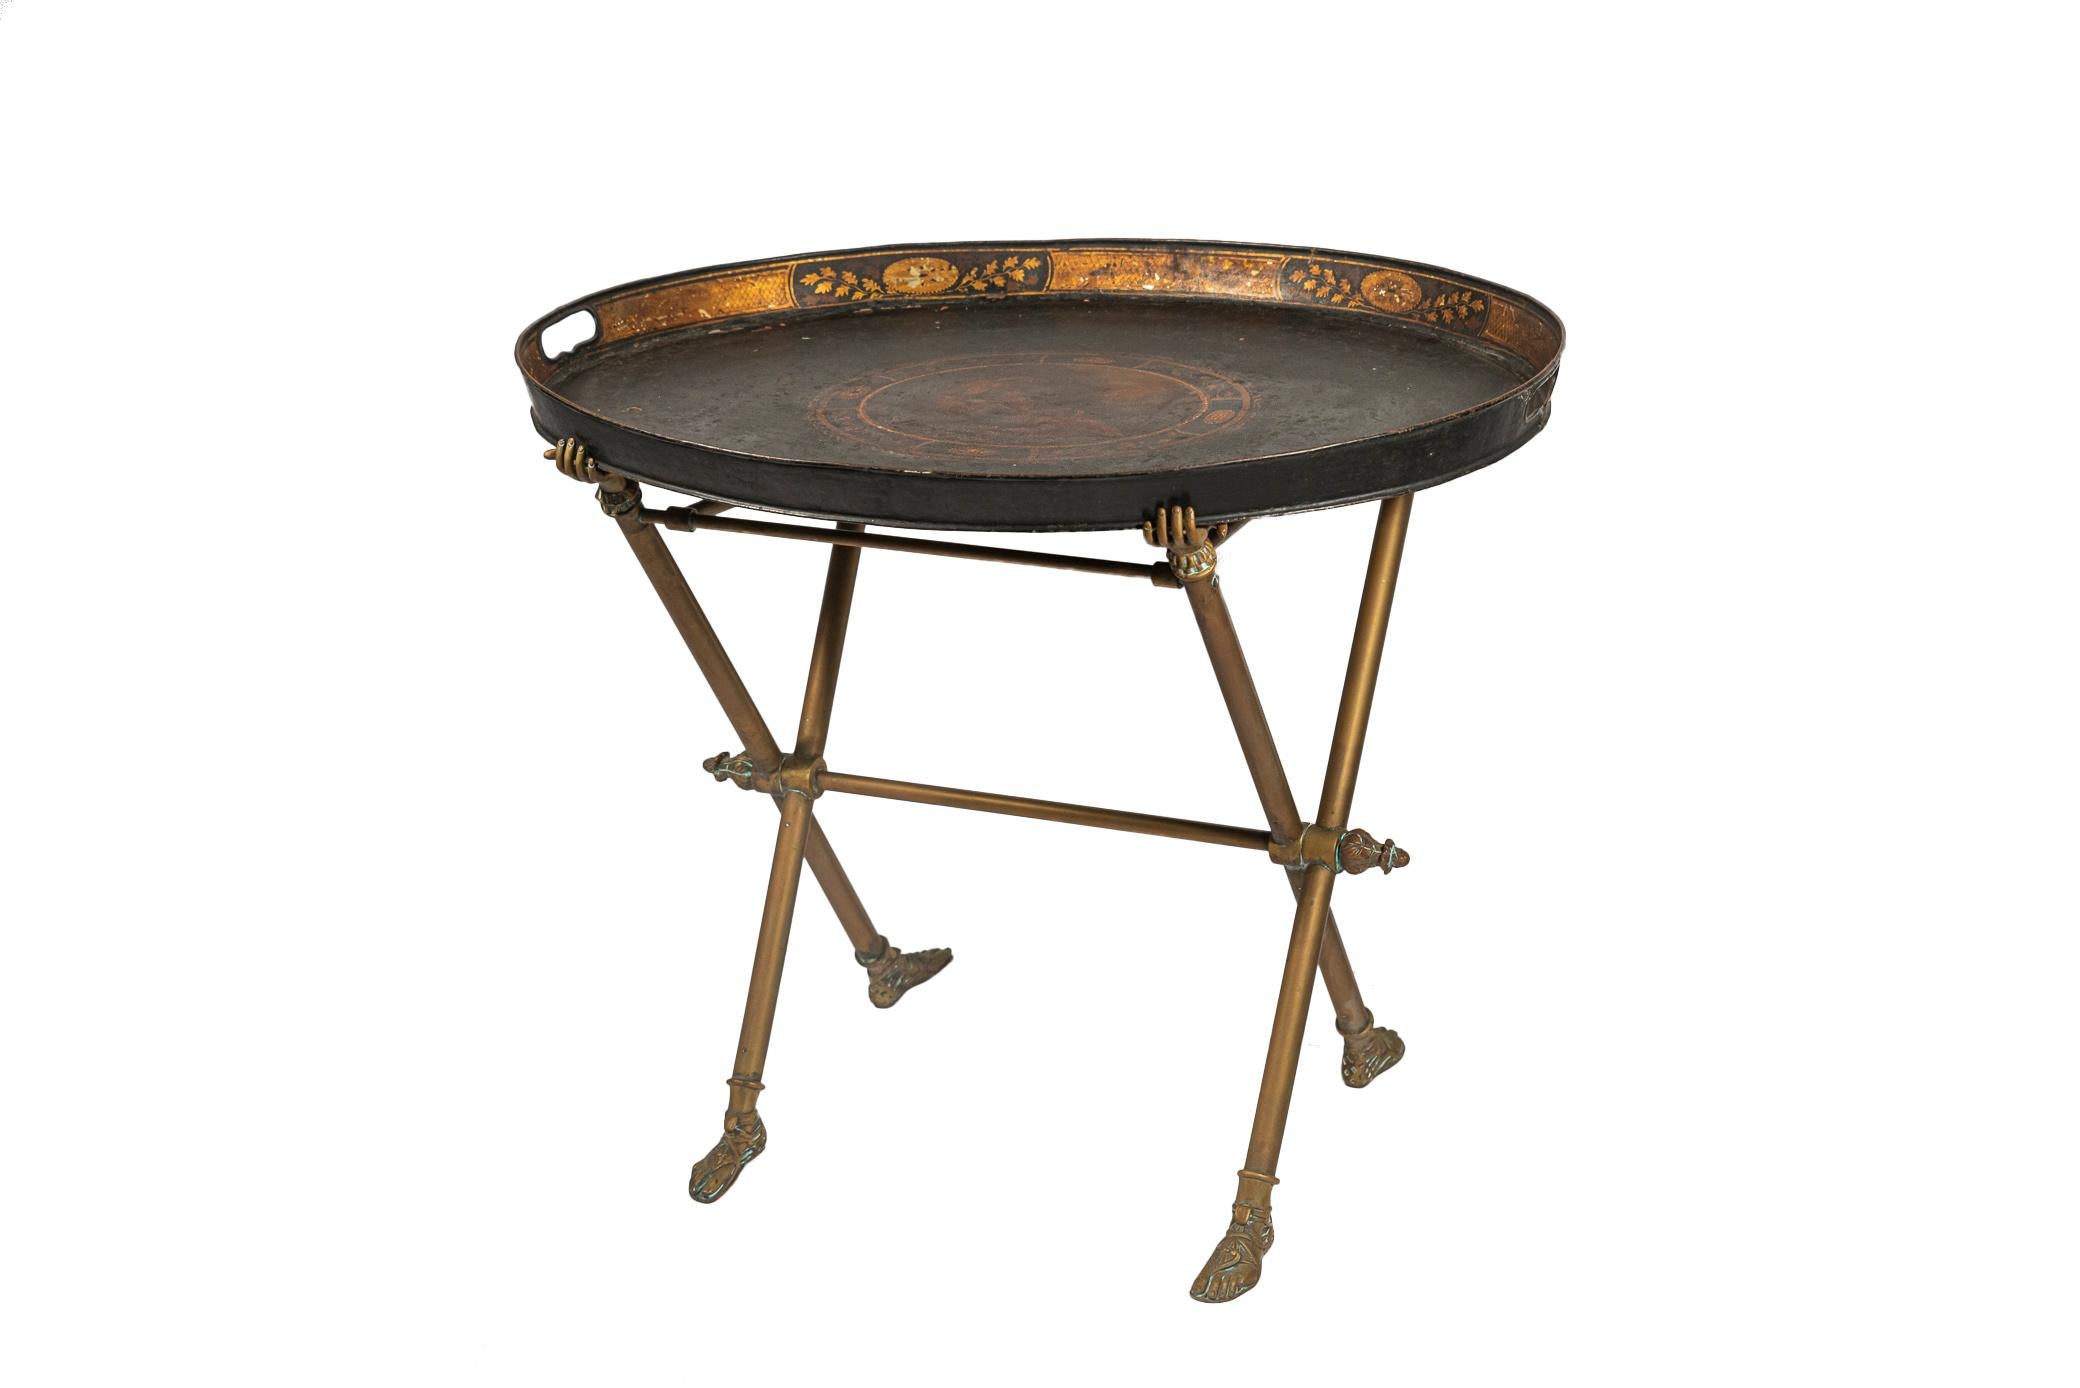 Coffee table,
Sheet metal tabletop decorated in the style of antique Rome with a medallion decorated with a gallant couple,
Bronze foot in the shape of antique sandals, tabletop grips in the shape of hands,
France, circa 1940.

Measures: Width 66